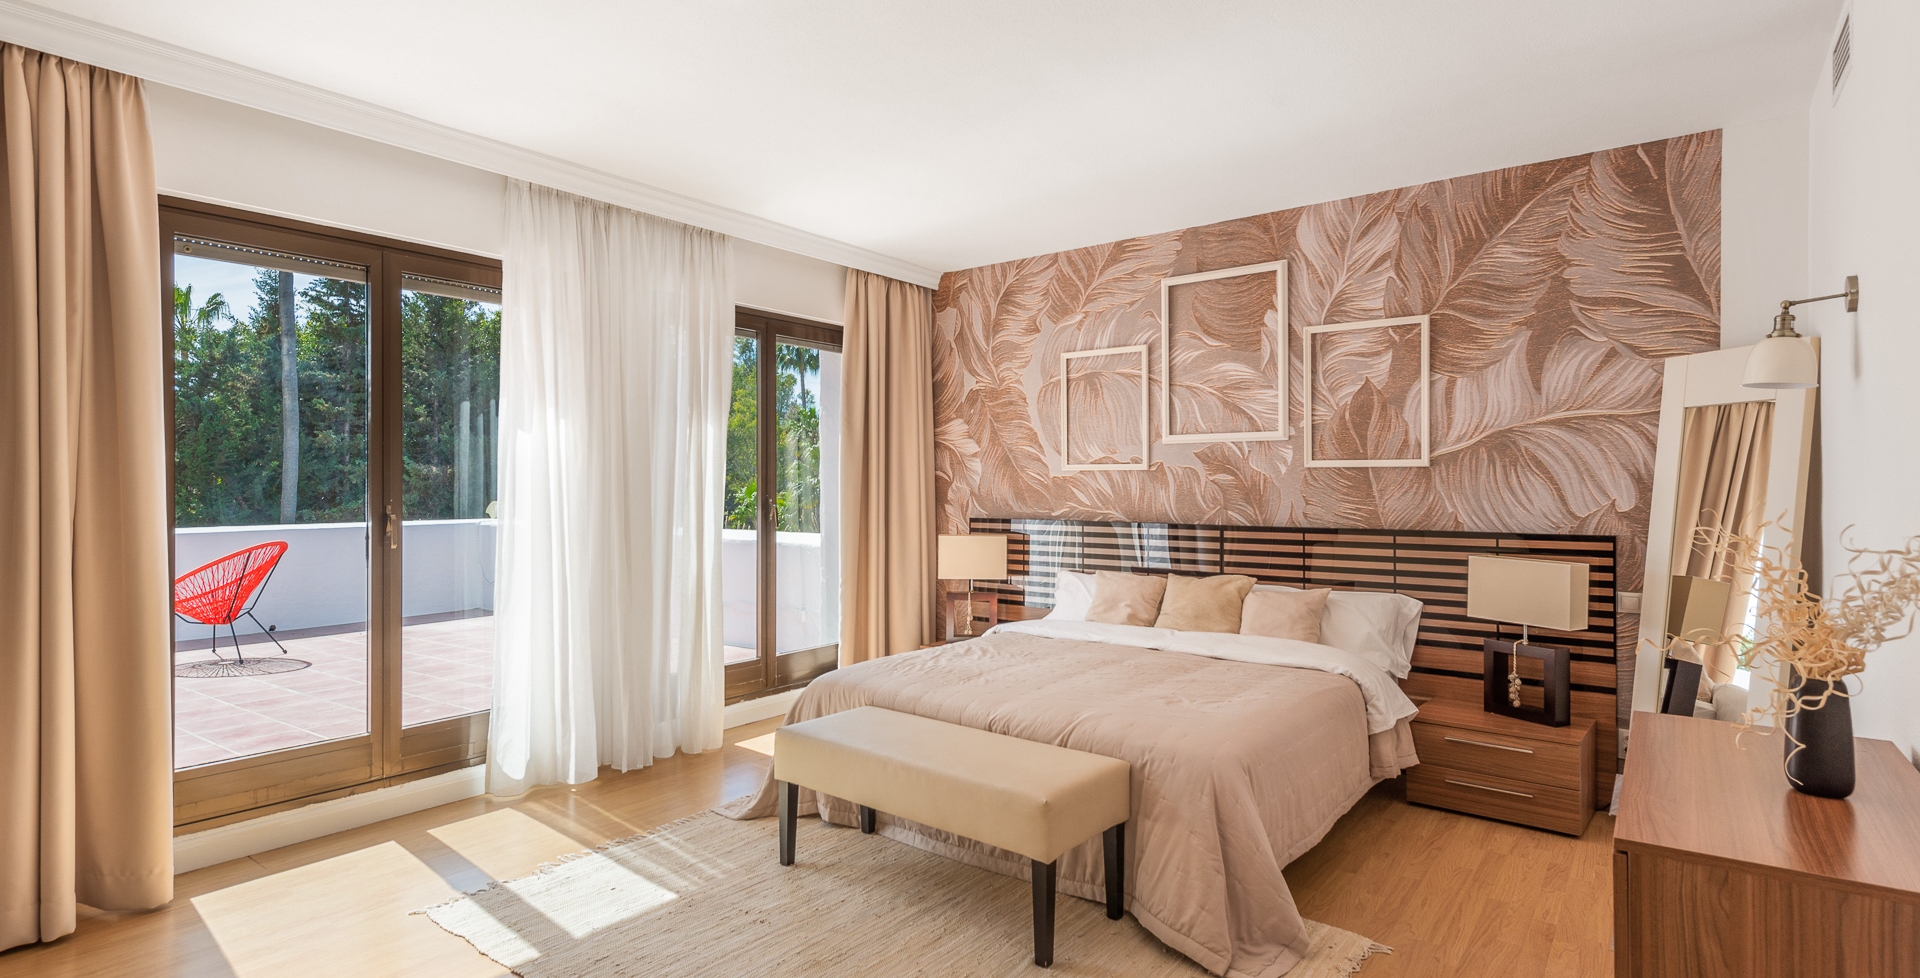 Villa Mar 13 Marbella superb large bedroom with private terrace